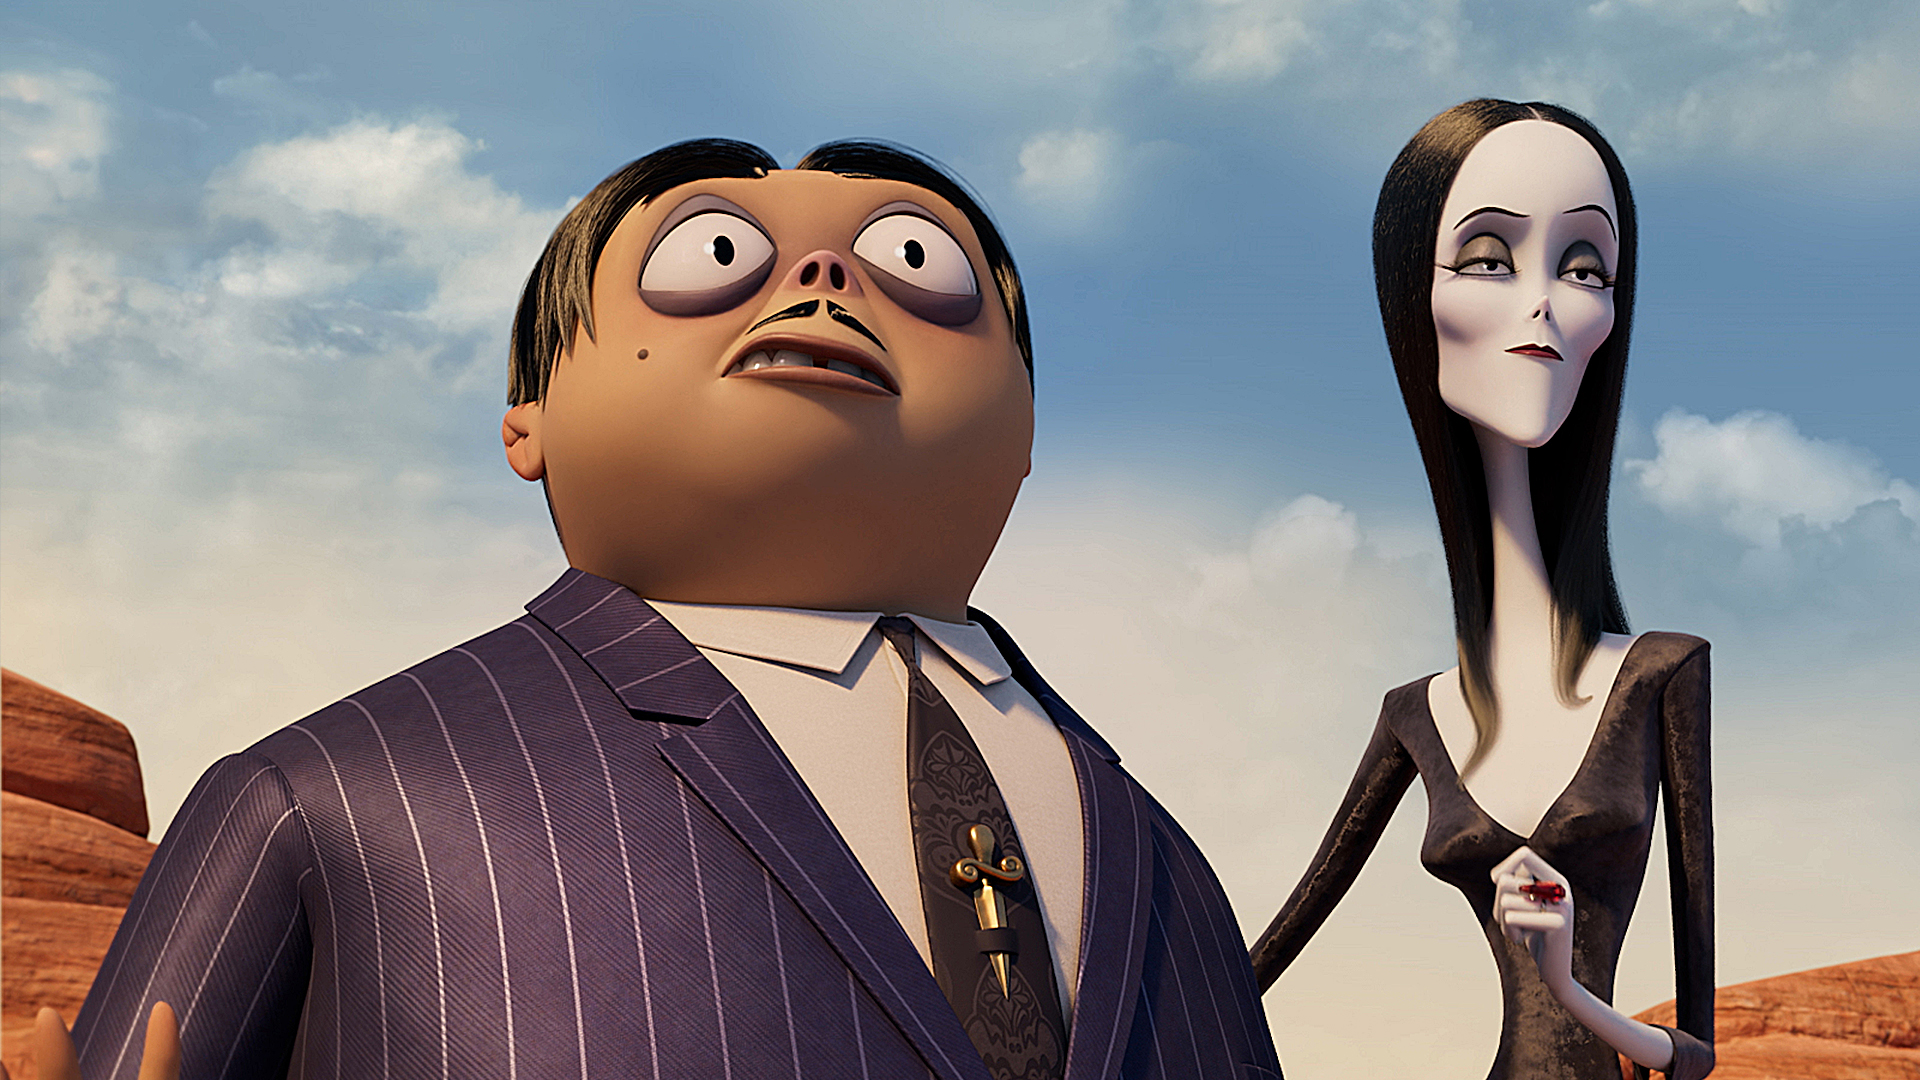 Watch The Addams Family 2 Online with NEON